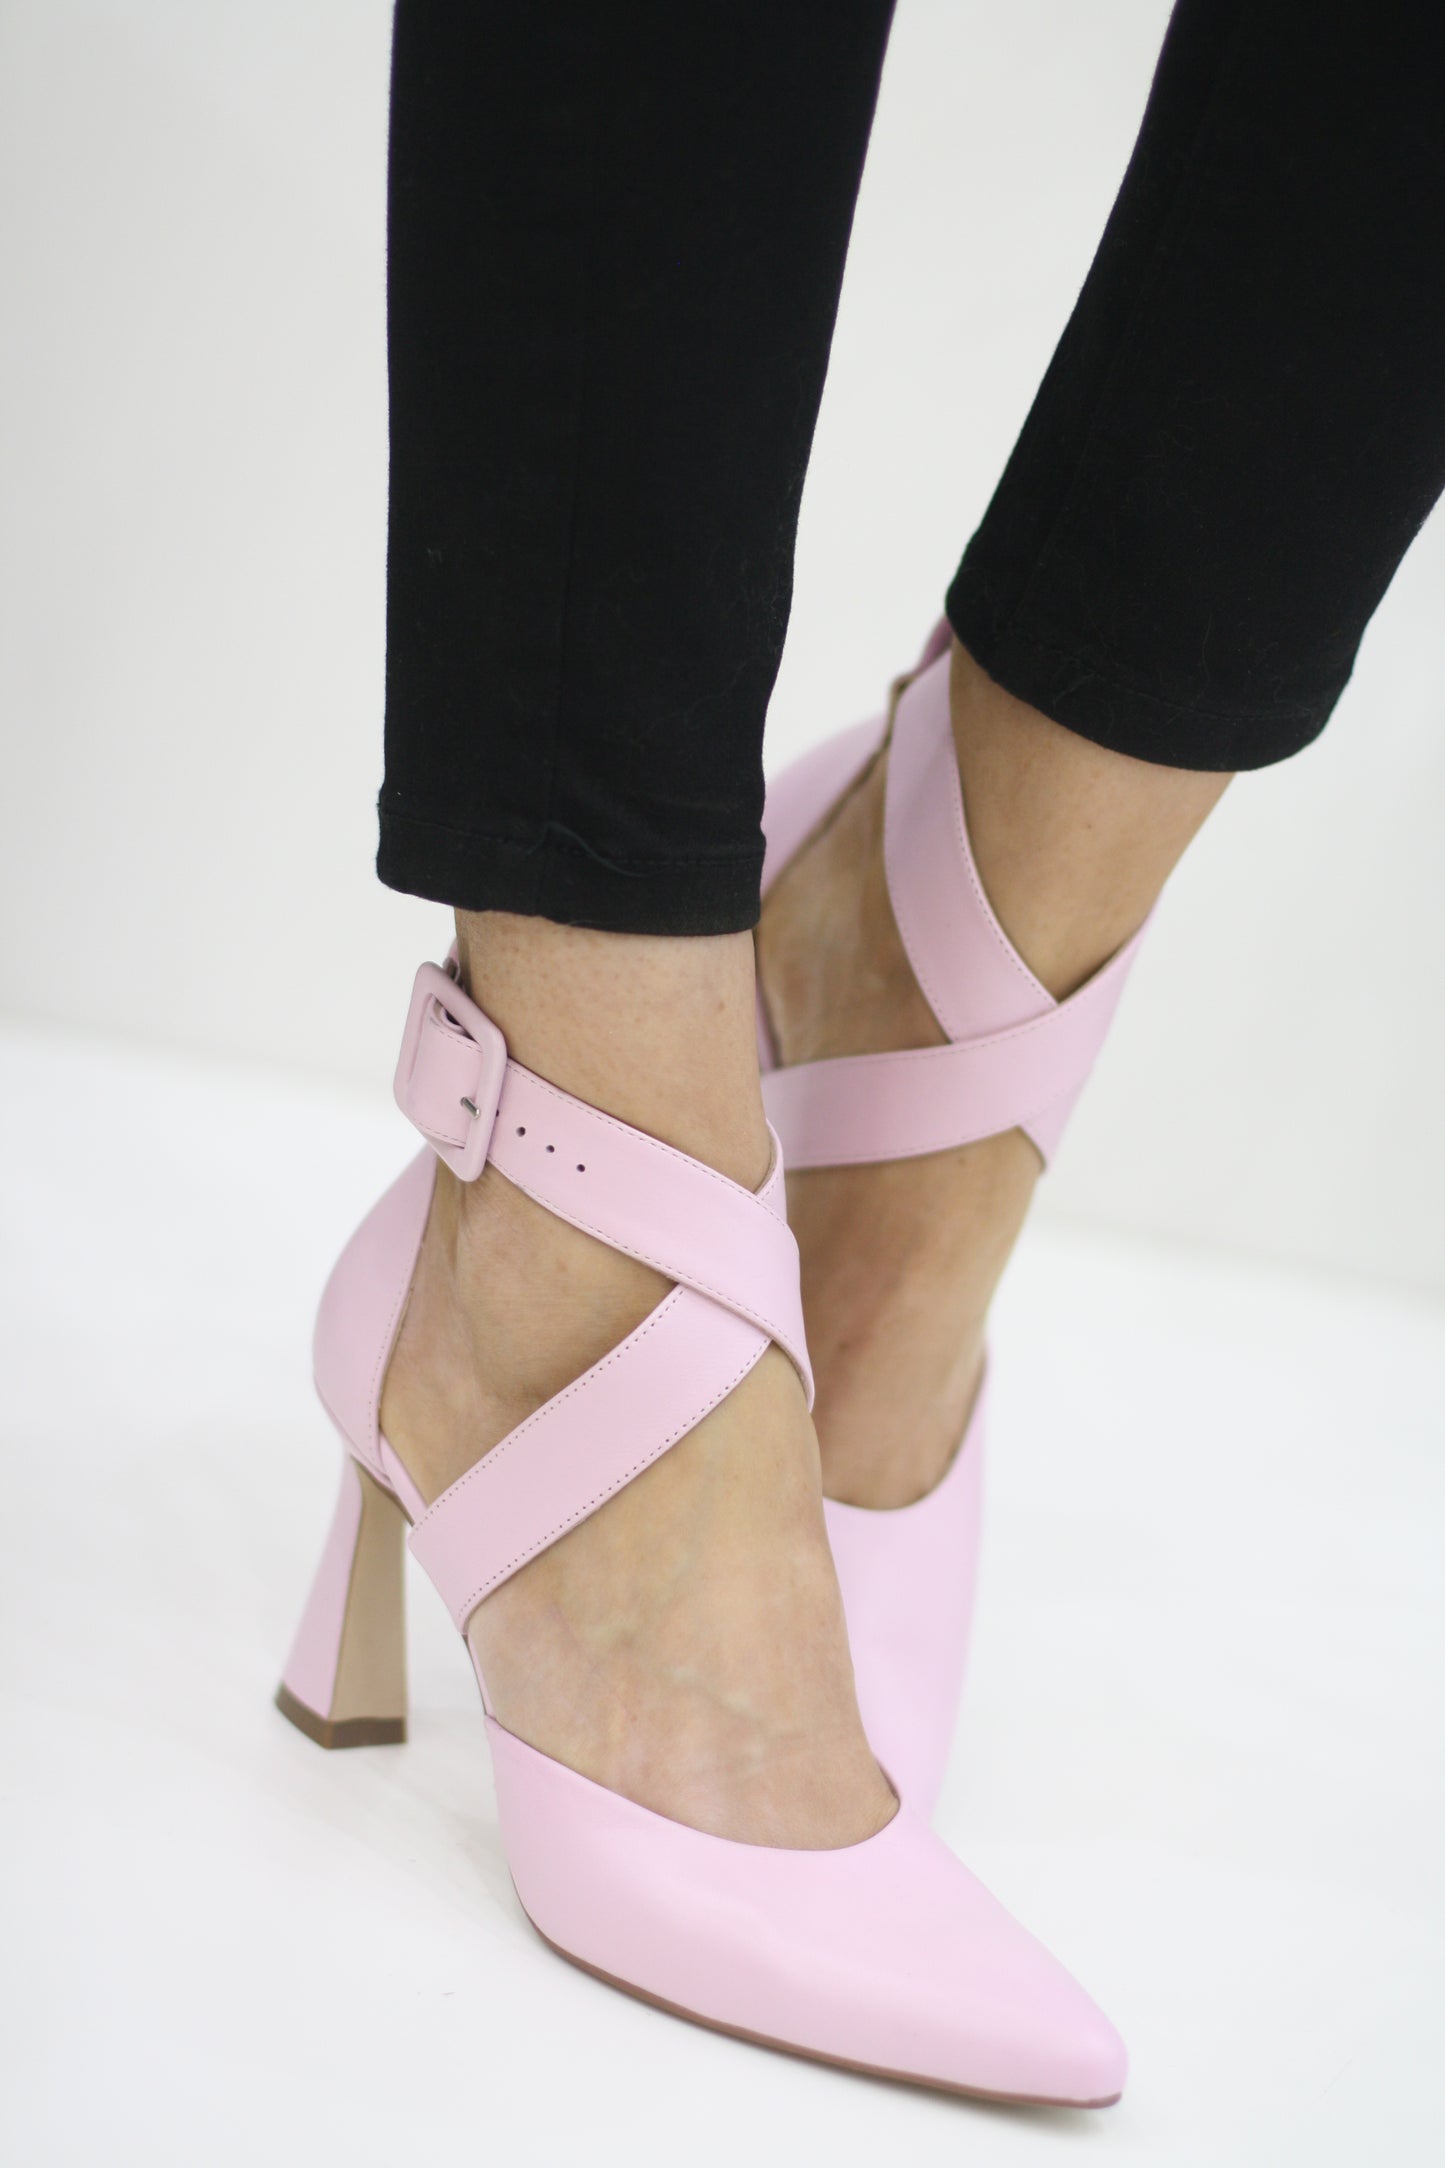 MARIAN 5704 BABY PINK LEATHER HEELS